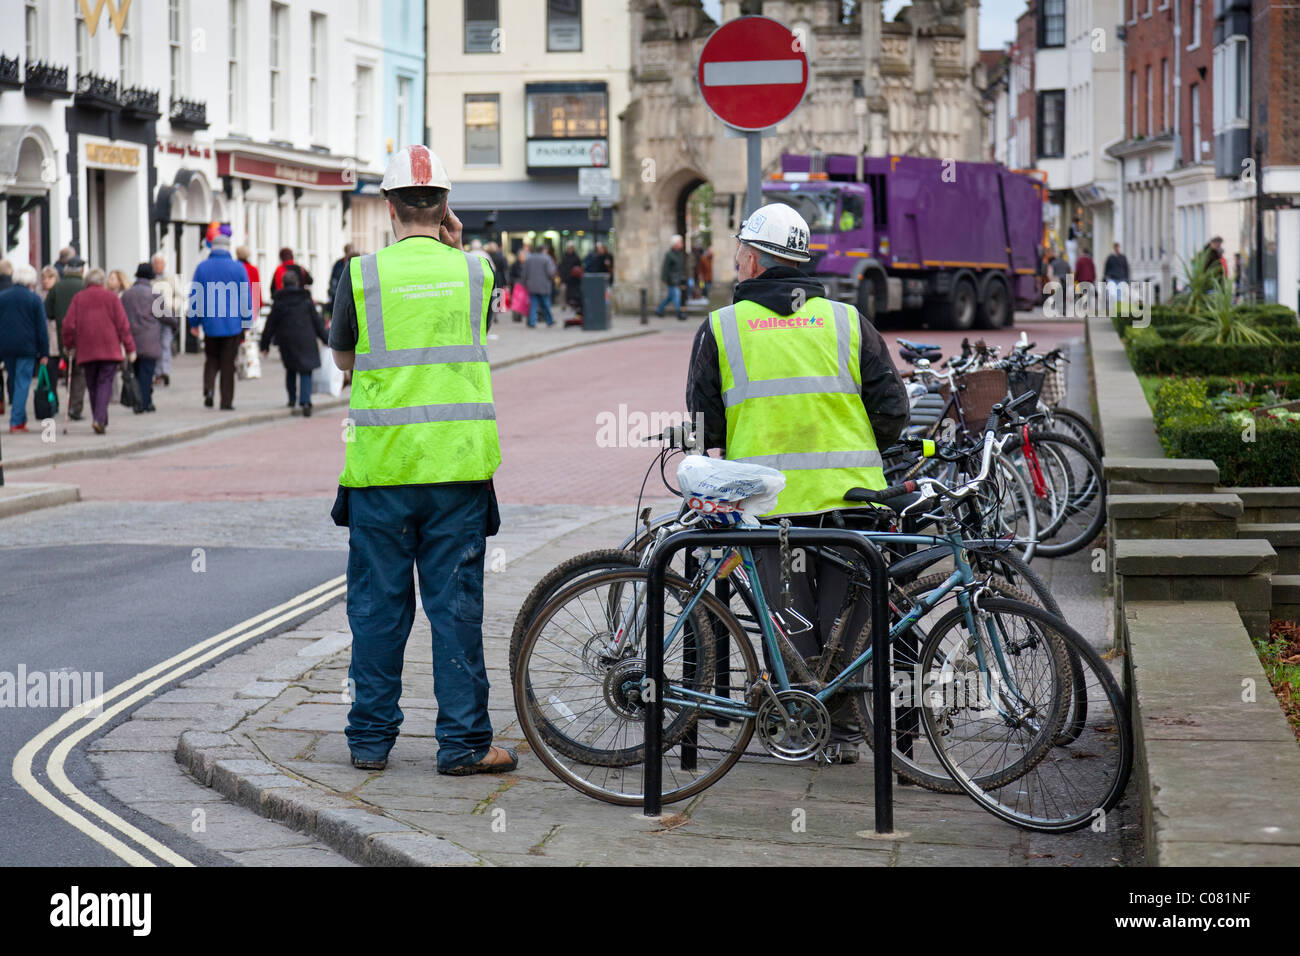 A workman in Hi-Viz jacket talks on his mobile phone while a colleague looks on. Stock Photo